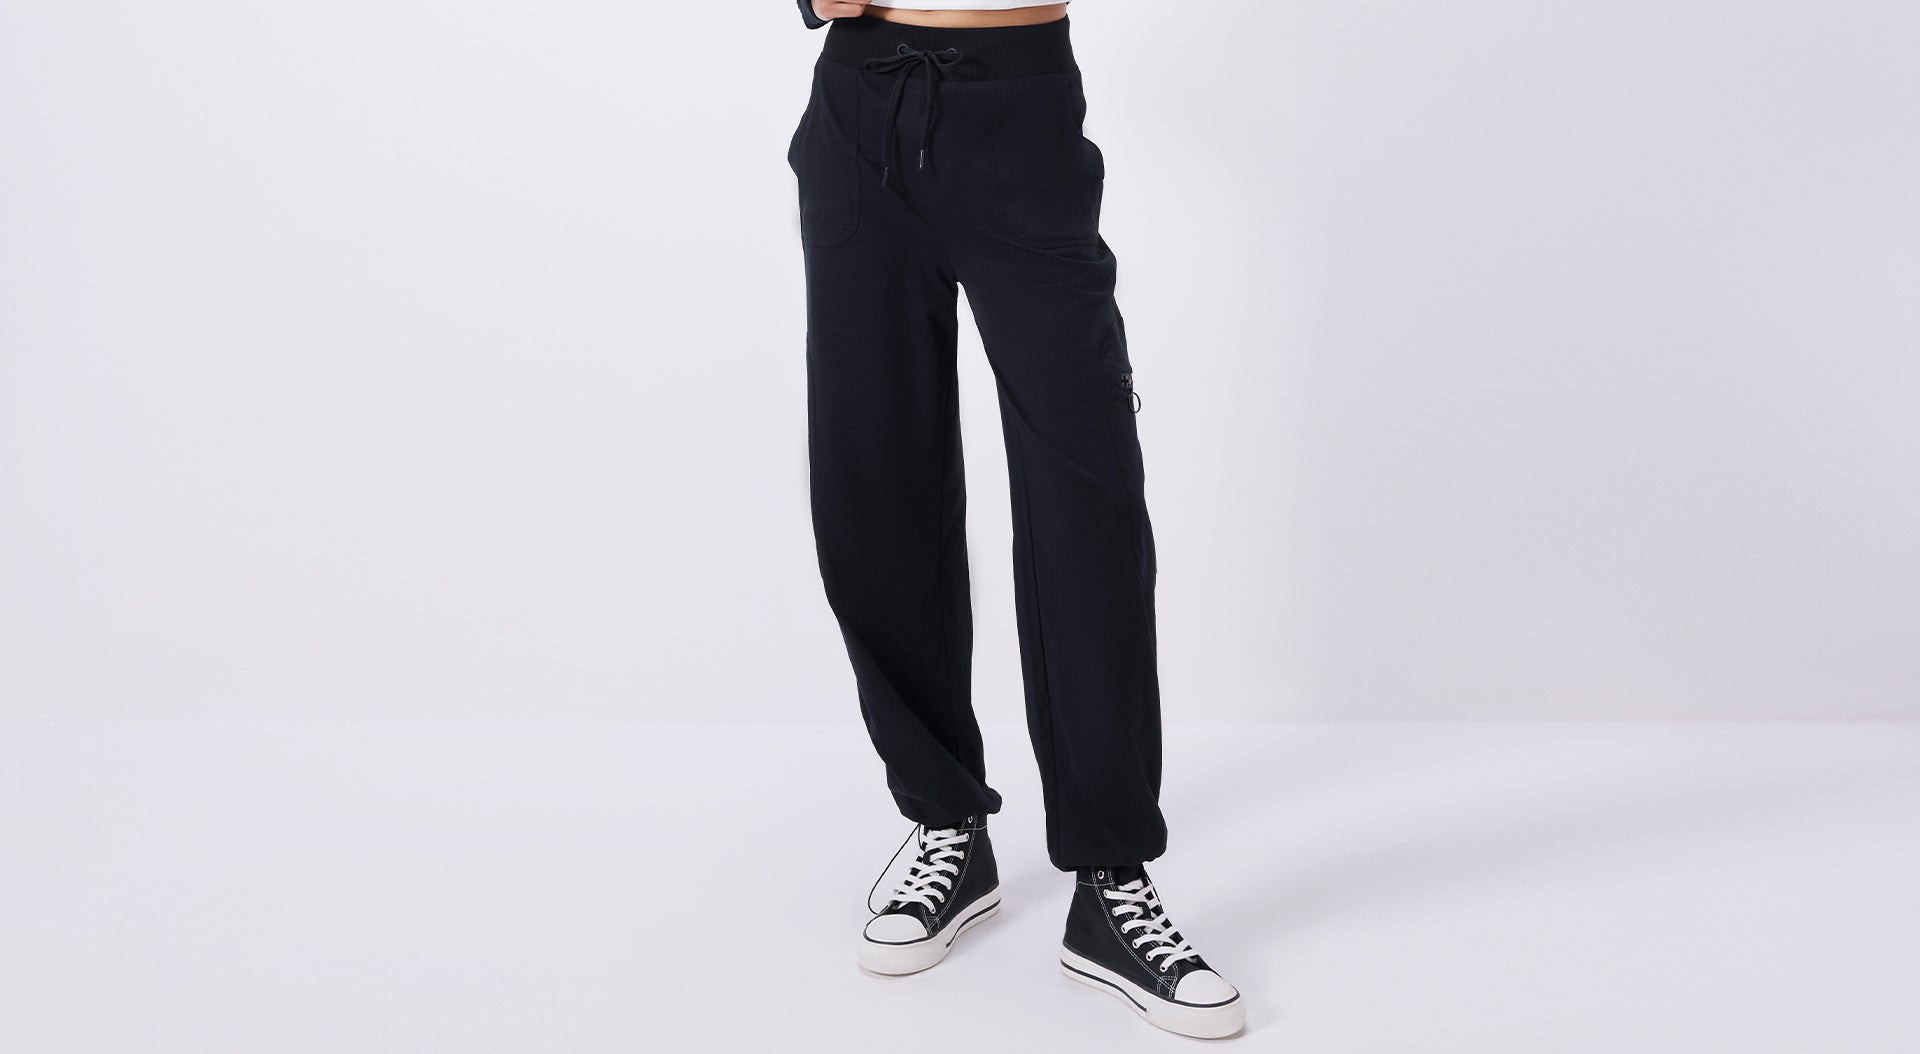 Airpow Clearance Loose Sweatpants Women Casual Solid Cotton And Linen  Workout Sports Wide Leg Pants Trousers Black XXL 